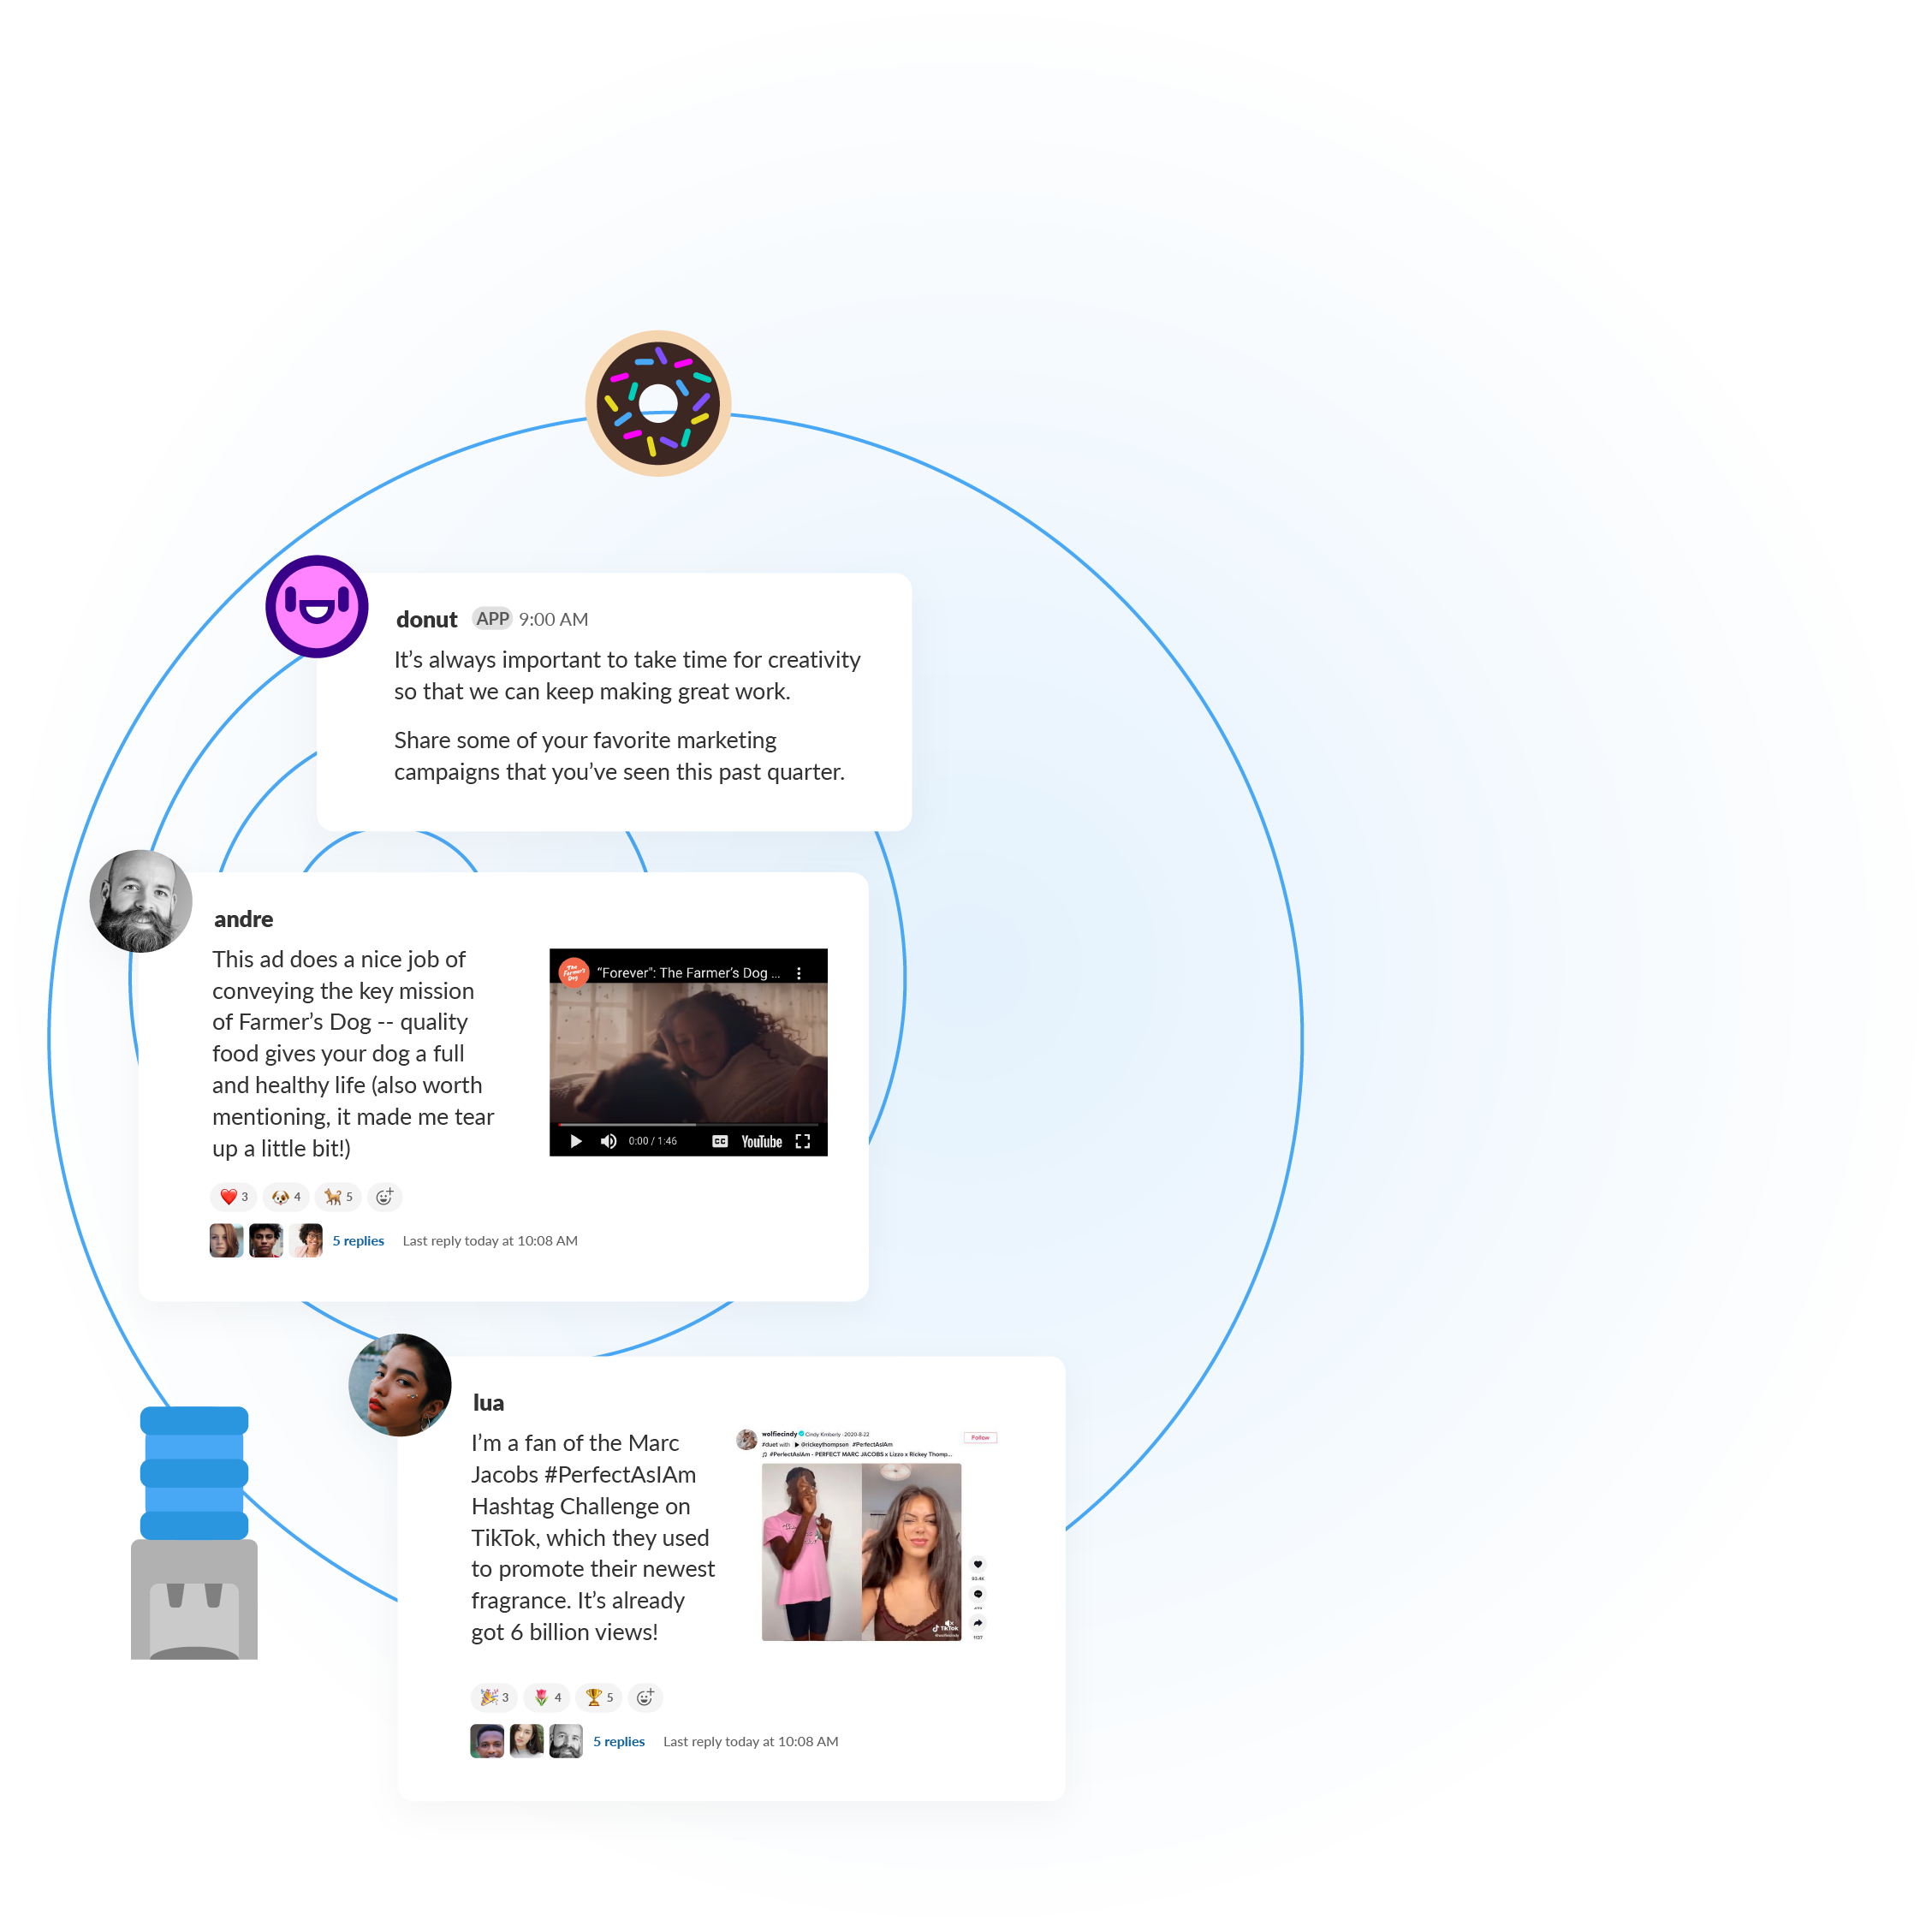 Screenshot of 3 Slack messages in a donut conversation about favorite marketing campaigns. First message from donut app prompts sharing campaigns from the past quarter. Second message is from Andre describing an ad from Farmer's Dog conveying quality food for dog health and longevity. Third message is from Lua mentioning the viral Marc Jacobs #PerfectAsIAm TikTok hashtag challenge for a new fragrance.